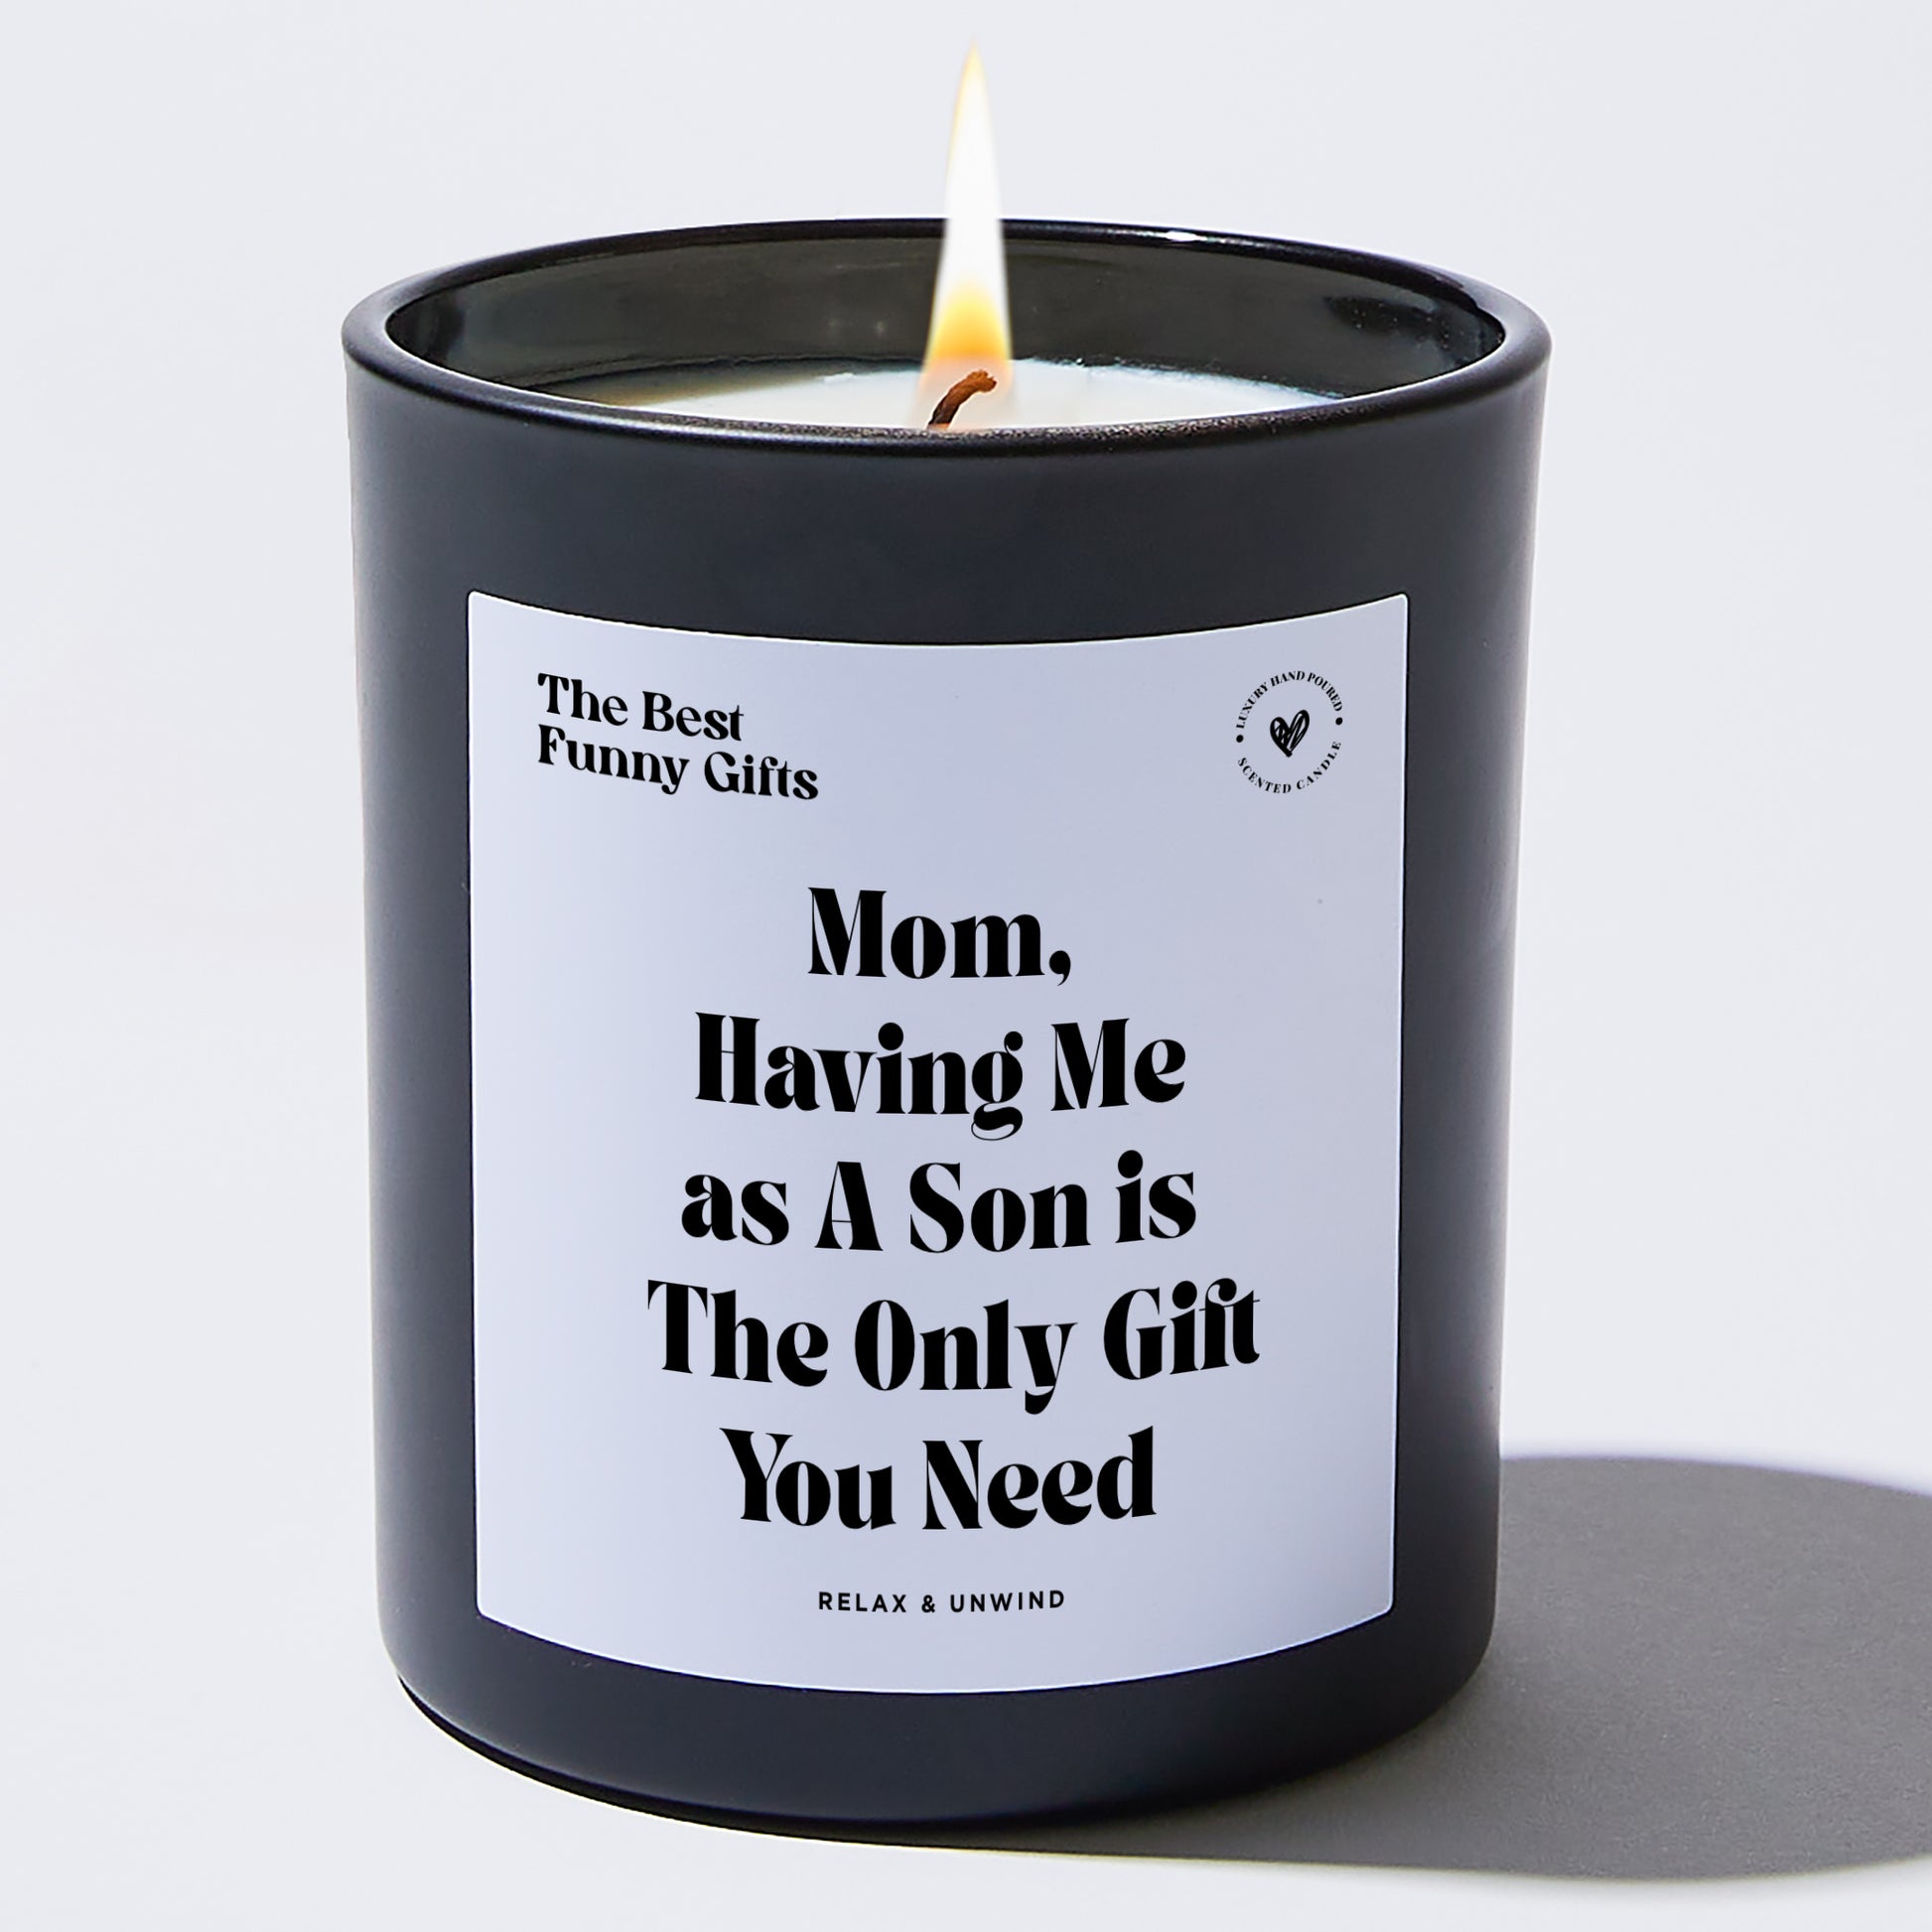 Gift for Mom Mom, Having Me As A Son Is The Only Gift You Need - The Best Funny Gifts